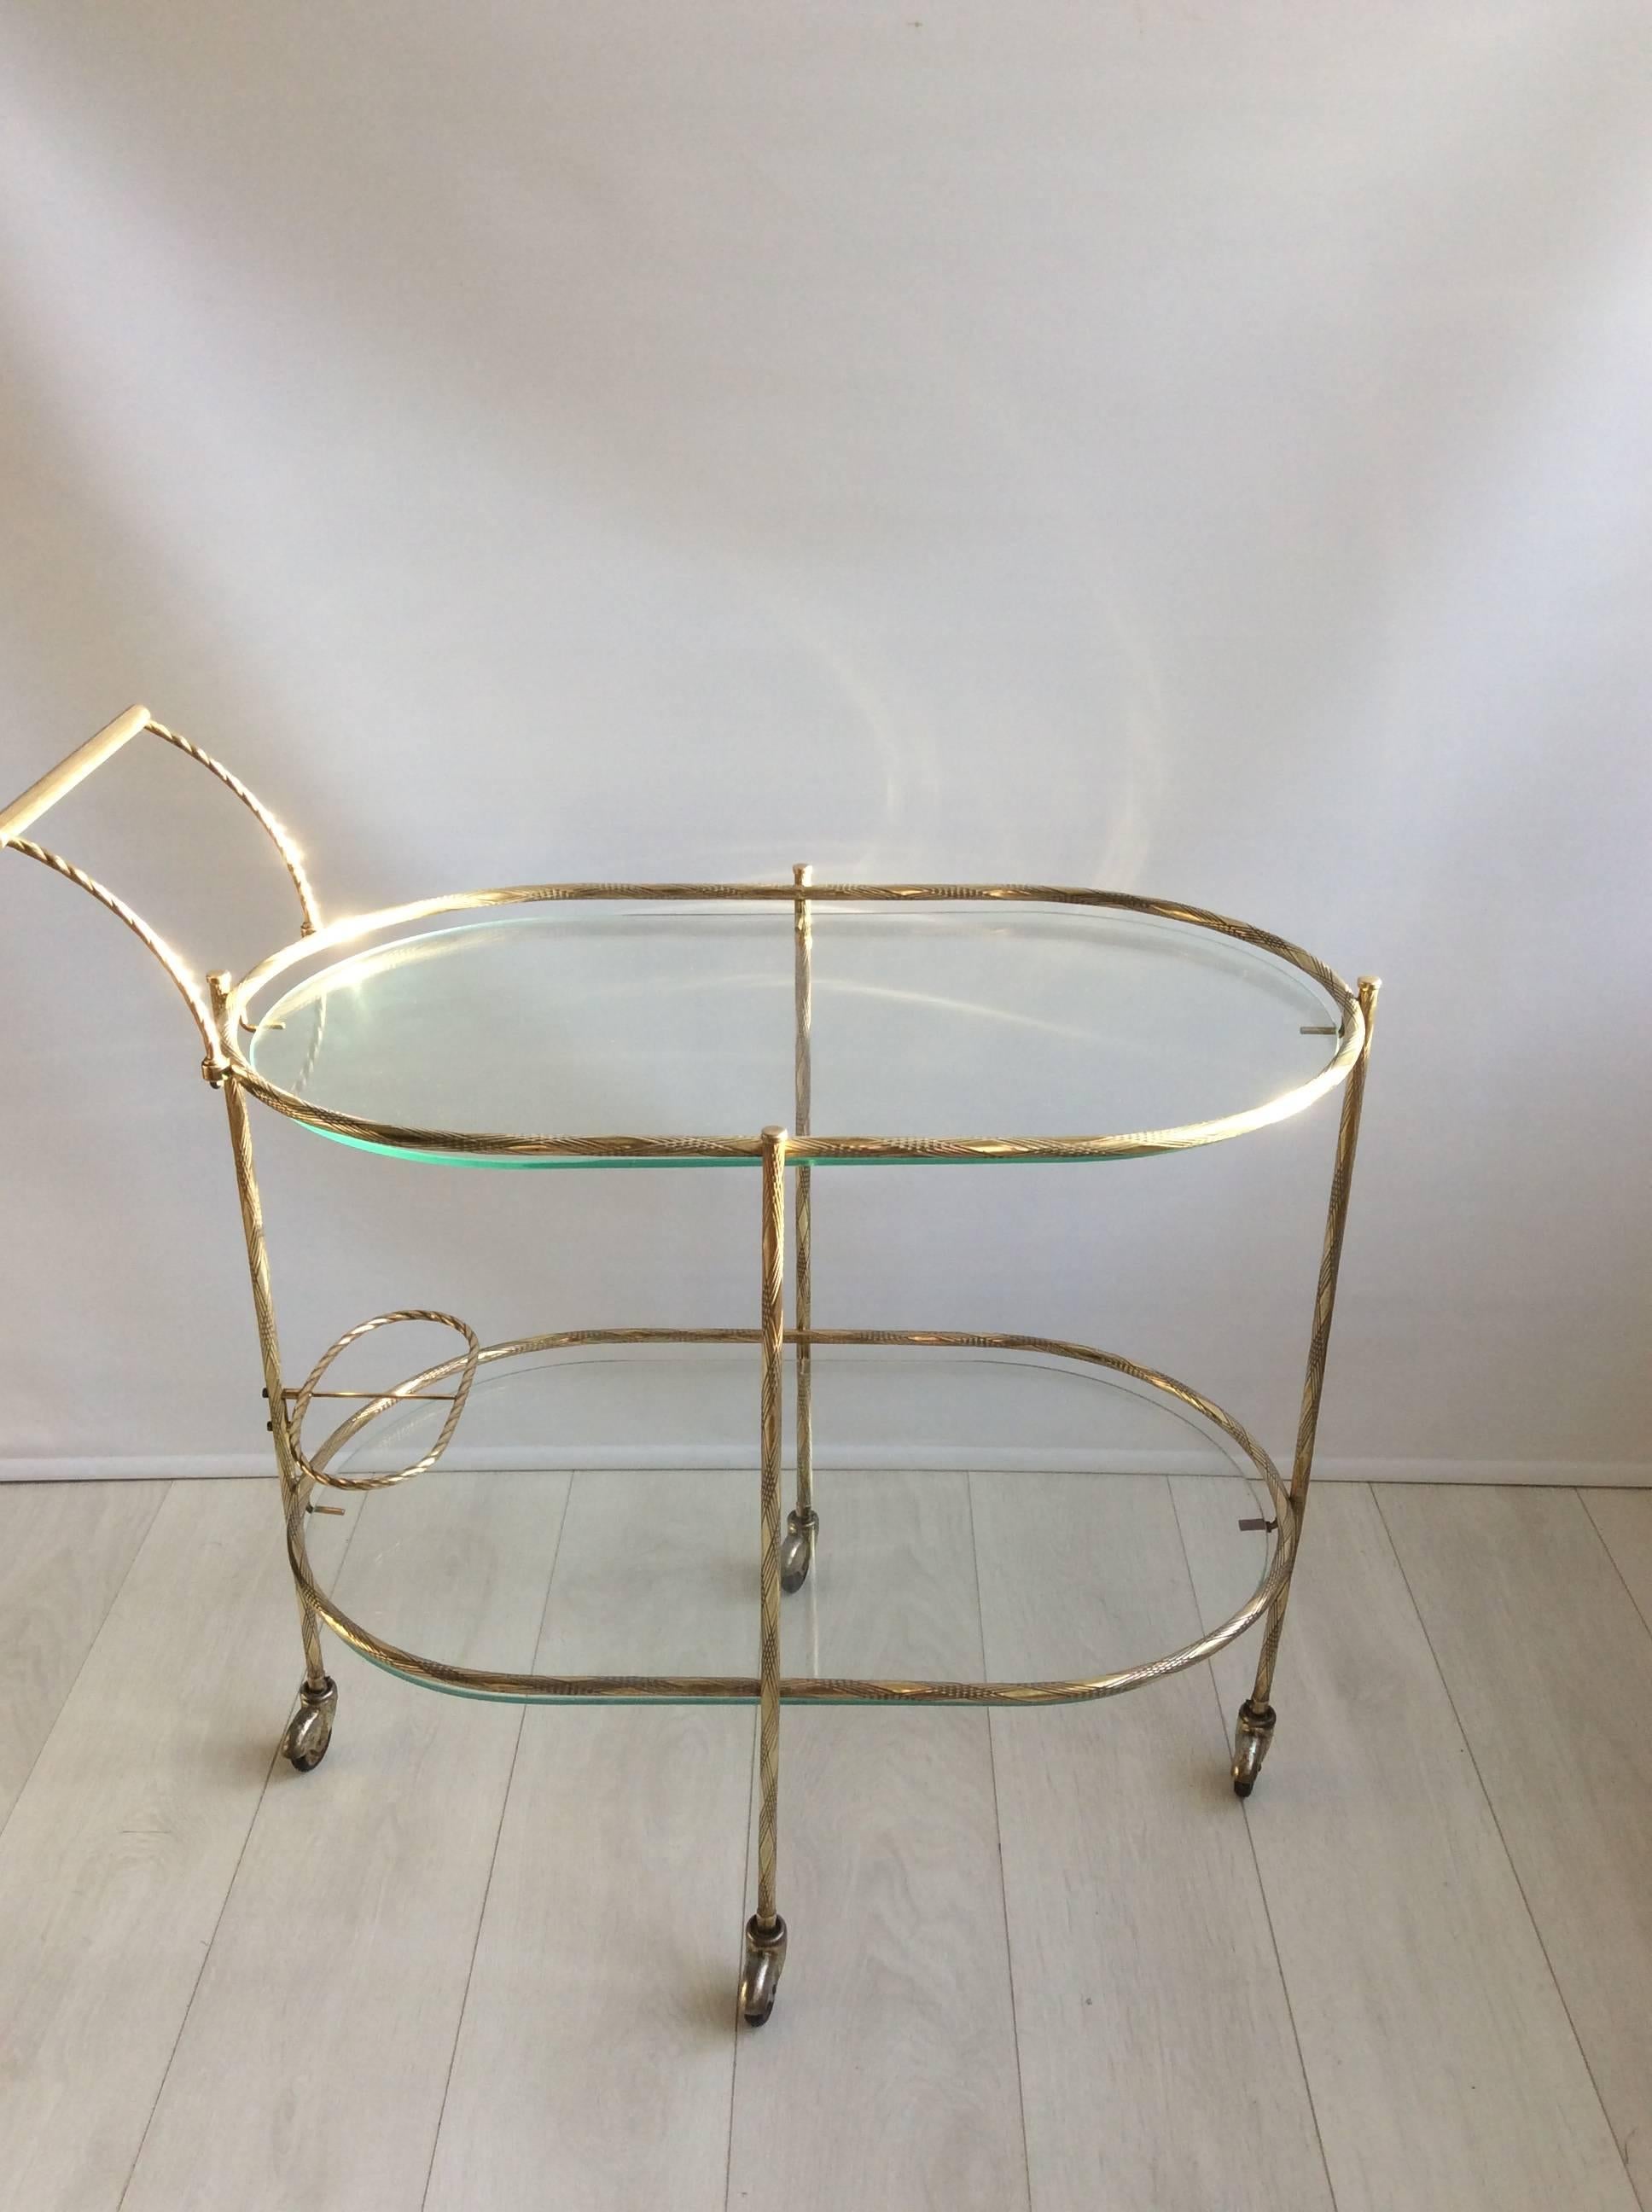 20th Century Delicate French Brass Drinks Trolley or Bar Cart